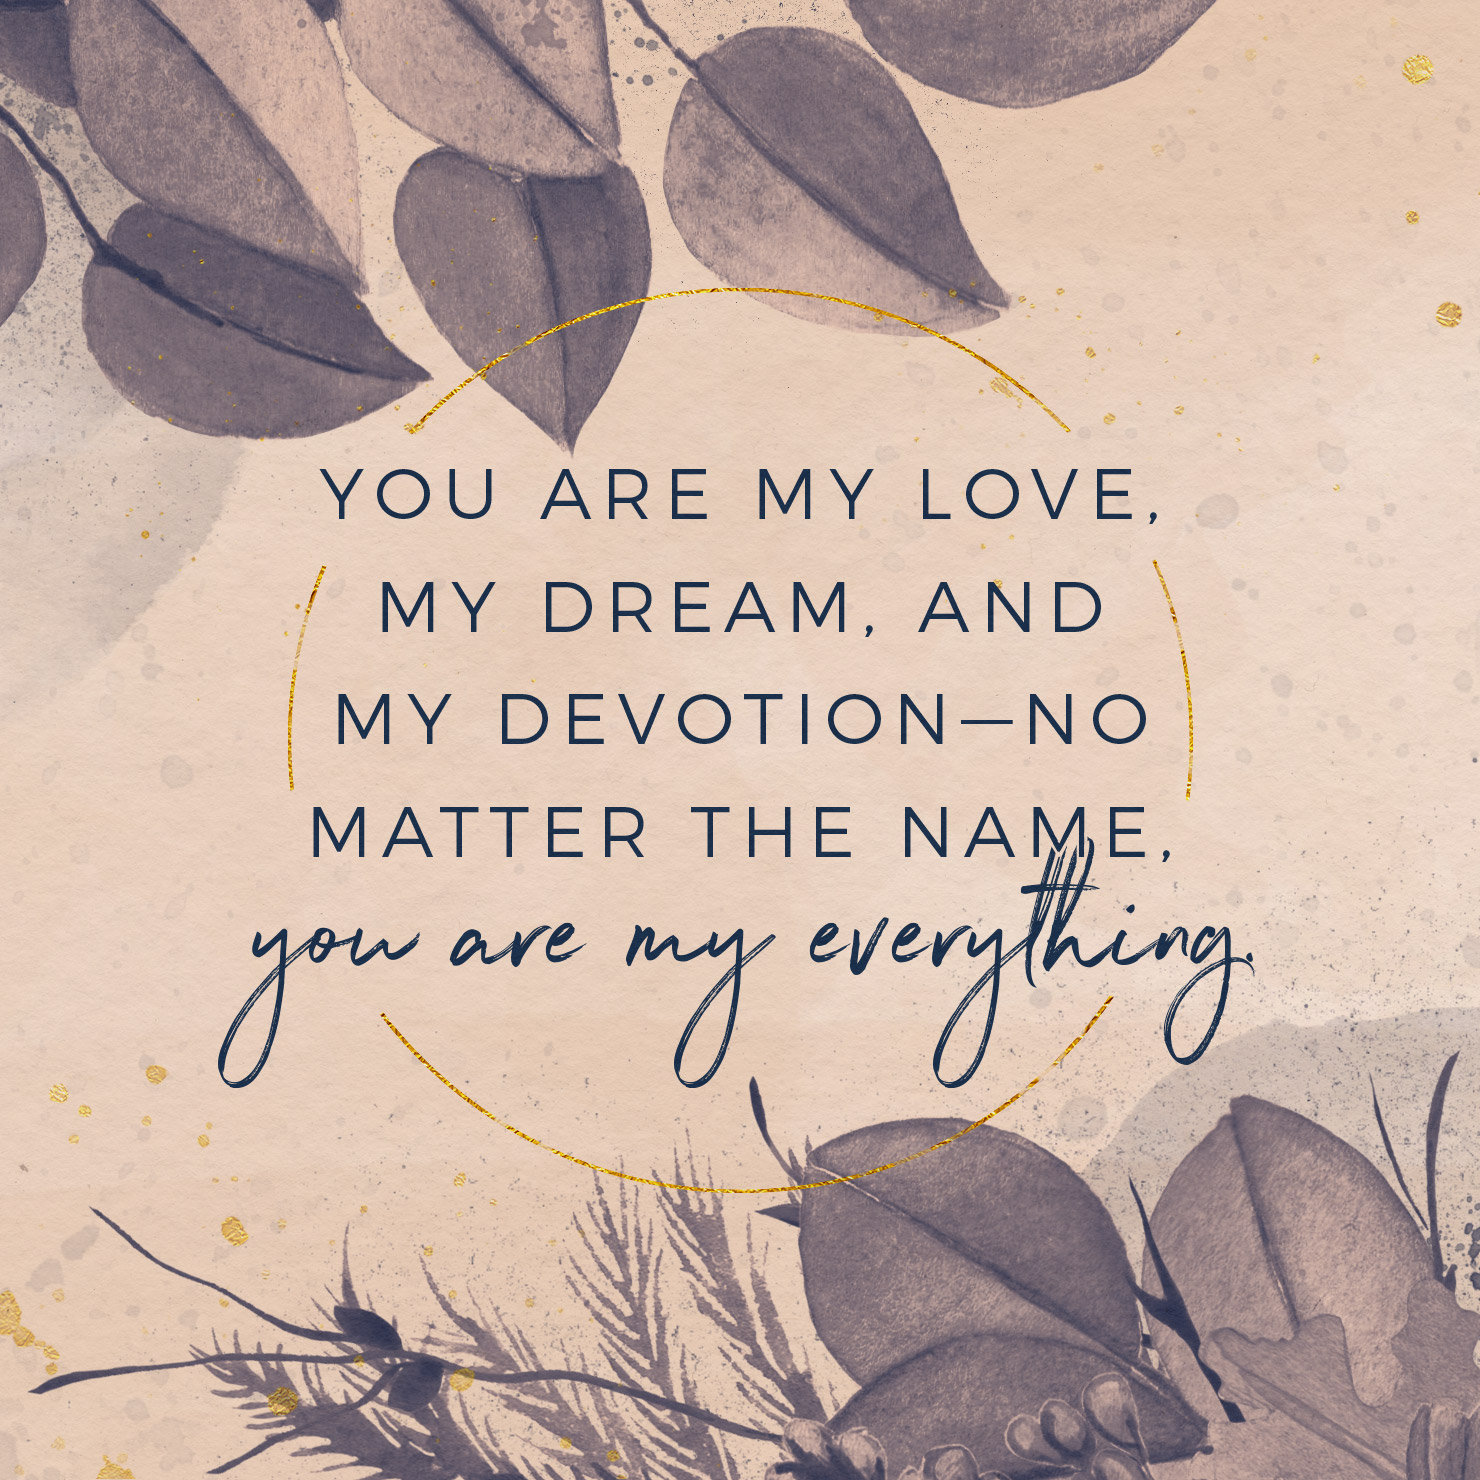 You are my love, my dream, and my devotion—no matter the name, you are my everything.